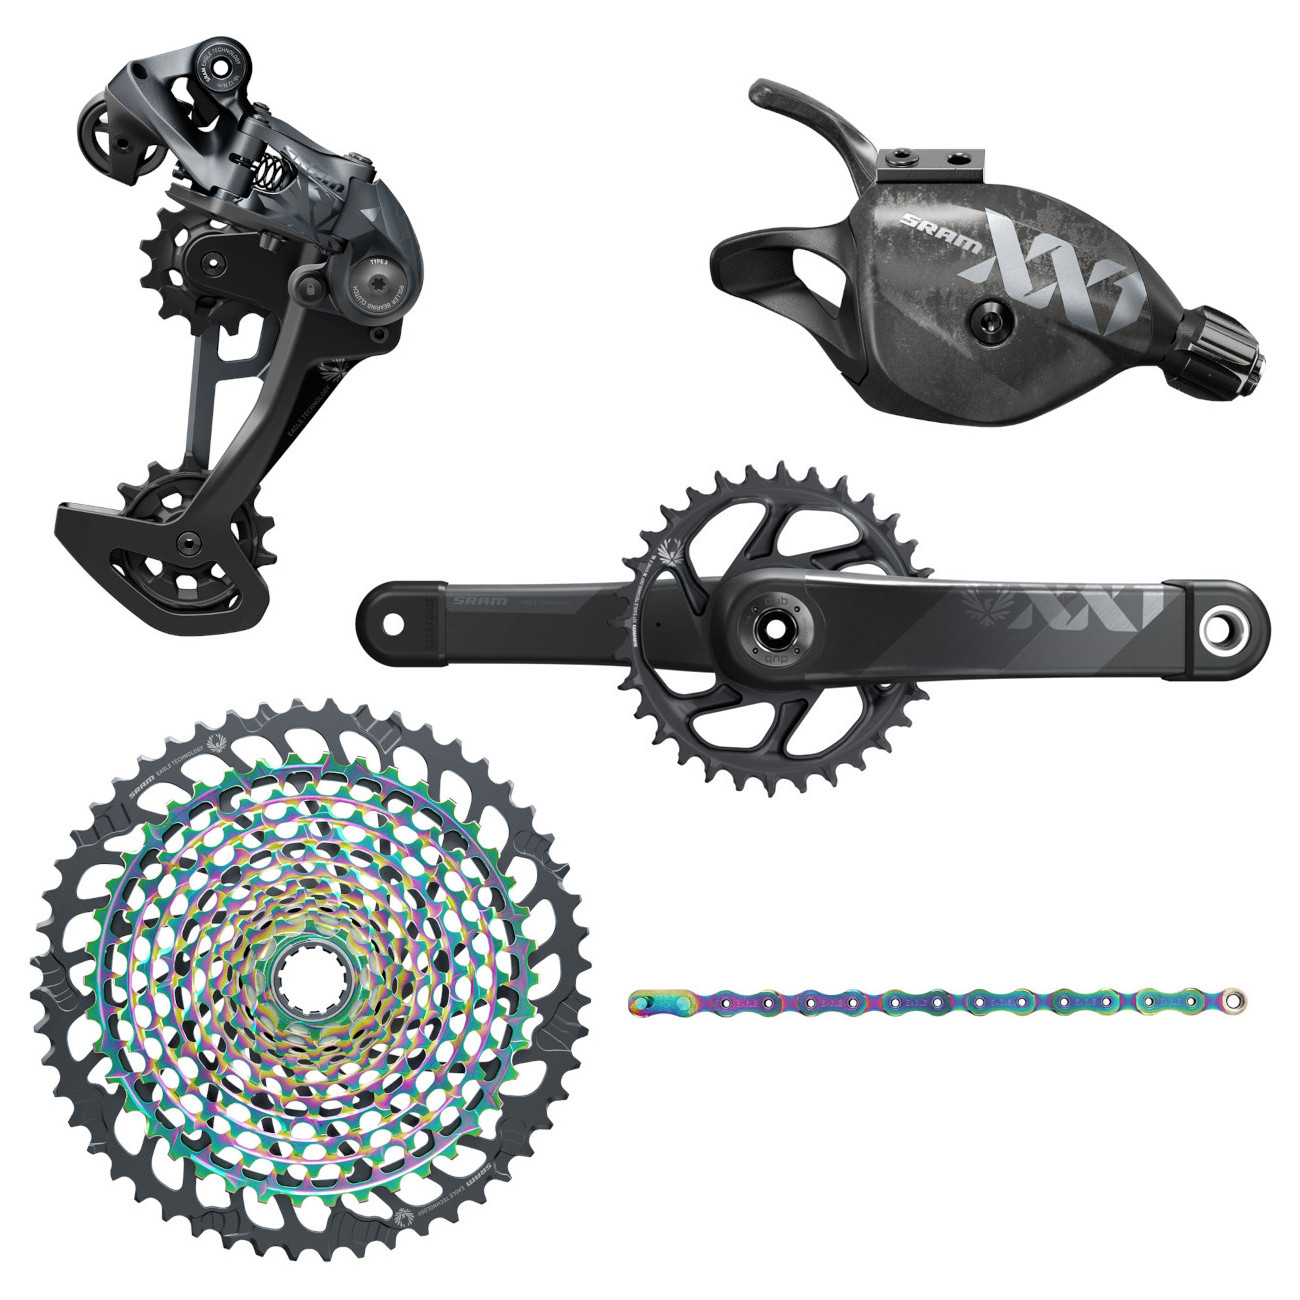 Image of SRAM XX1 Eagle Boost Groupset - 1x12-speed - Trigger Shifter - 10-52 t. XG-1299 Cassette - rainbow